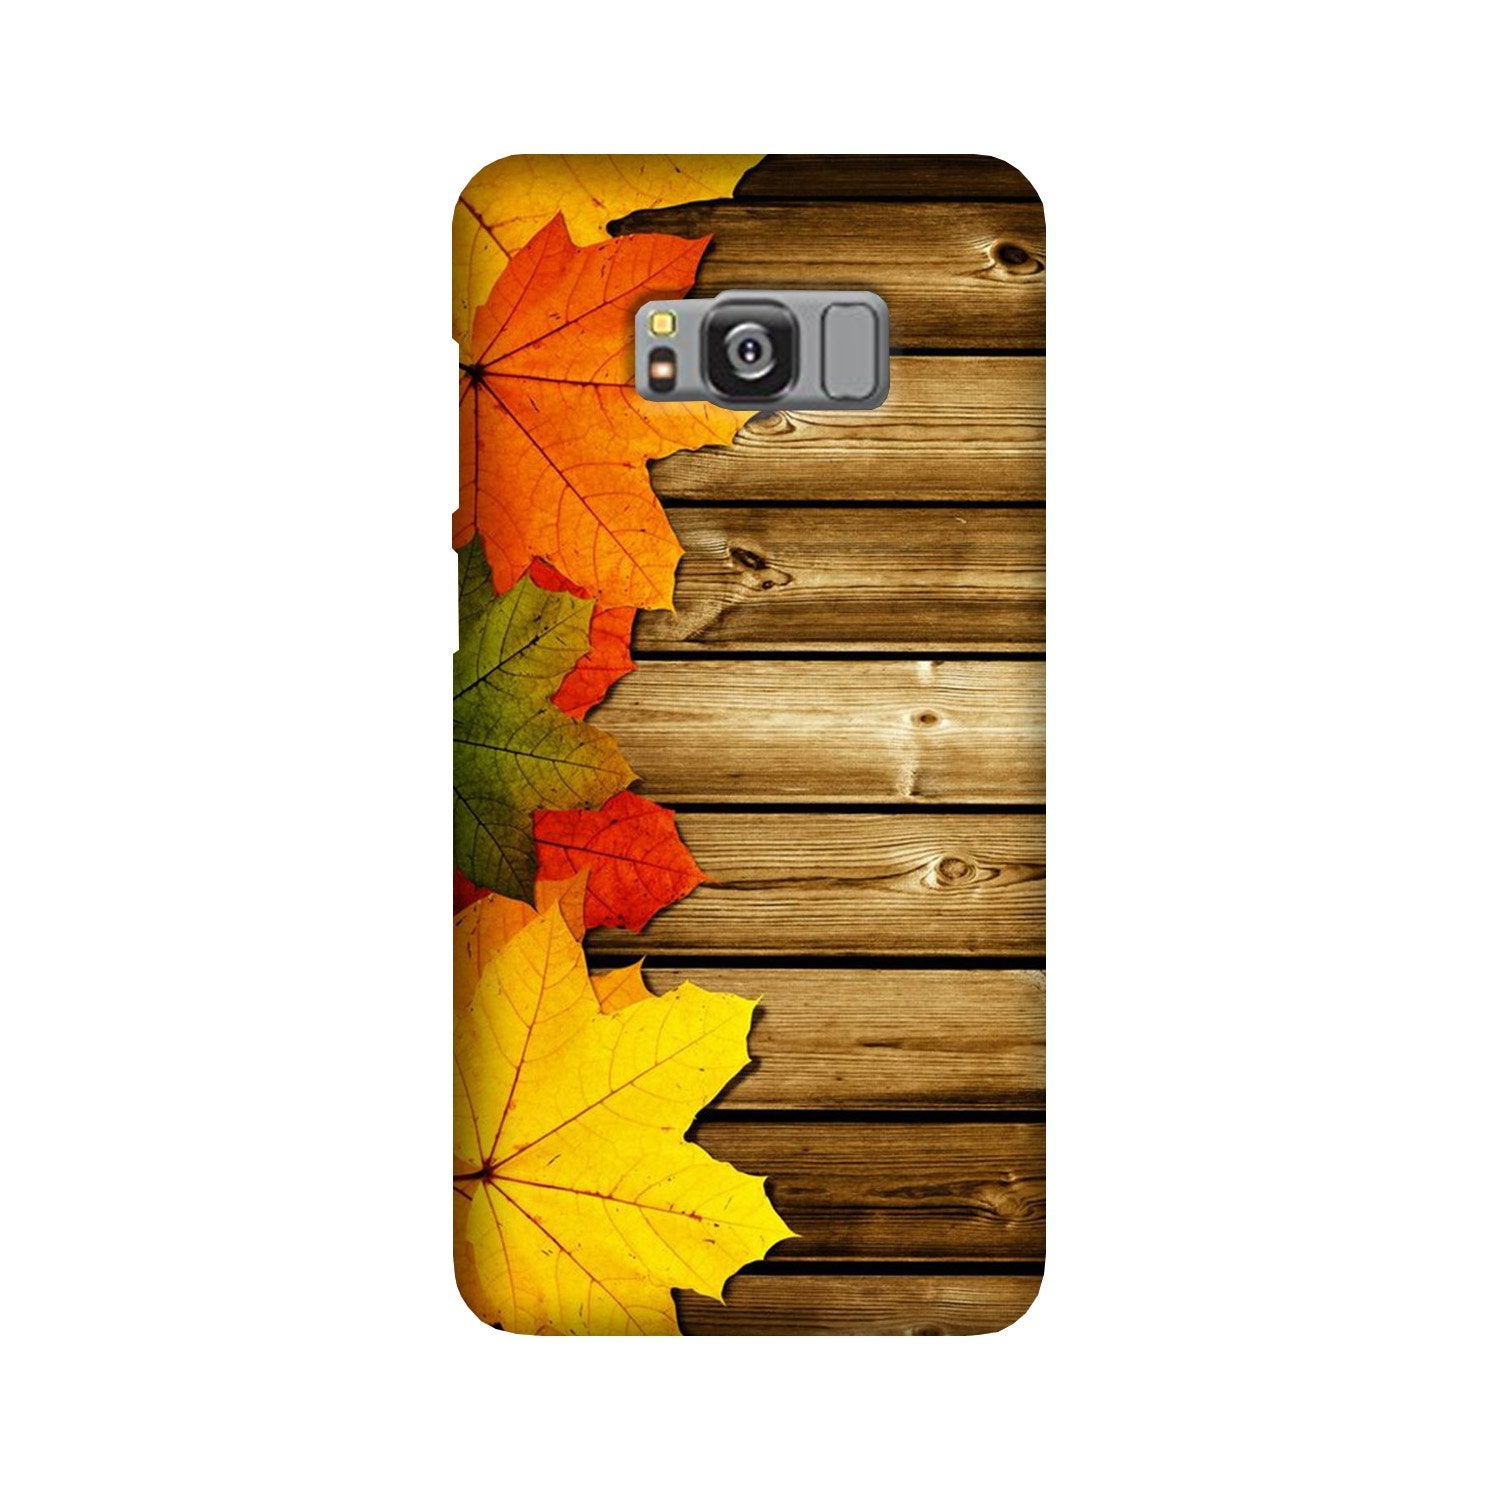 Wooden look3 Case for Galaxy S8